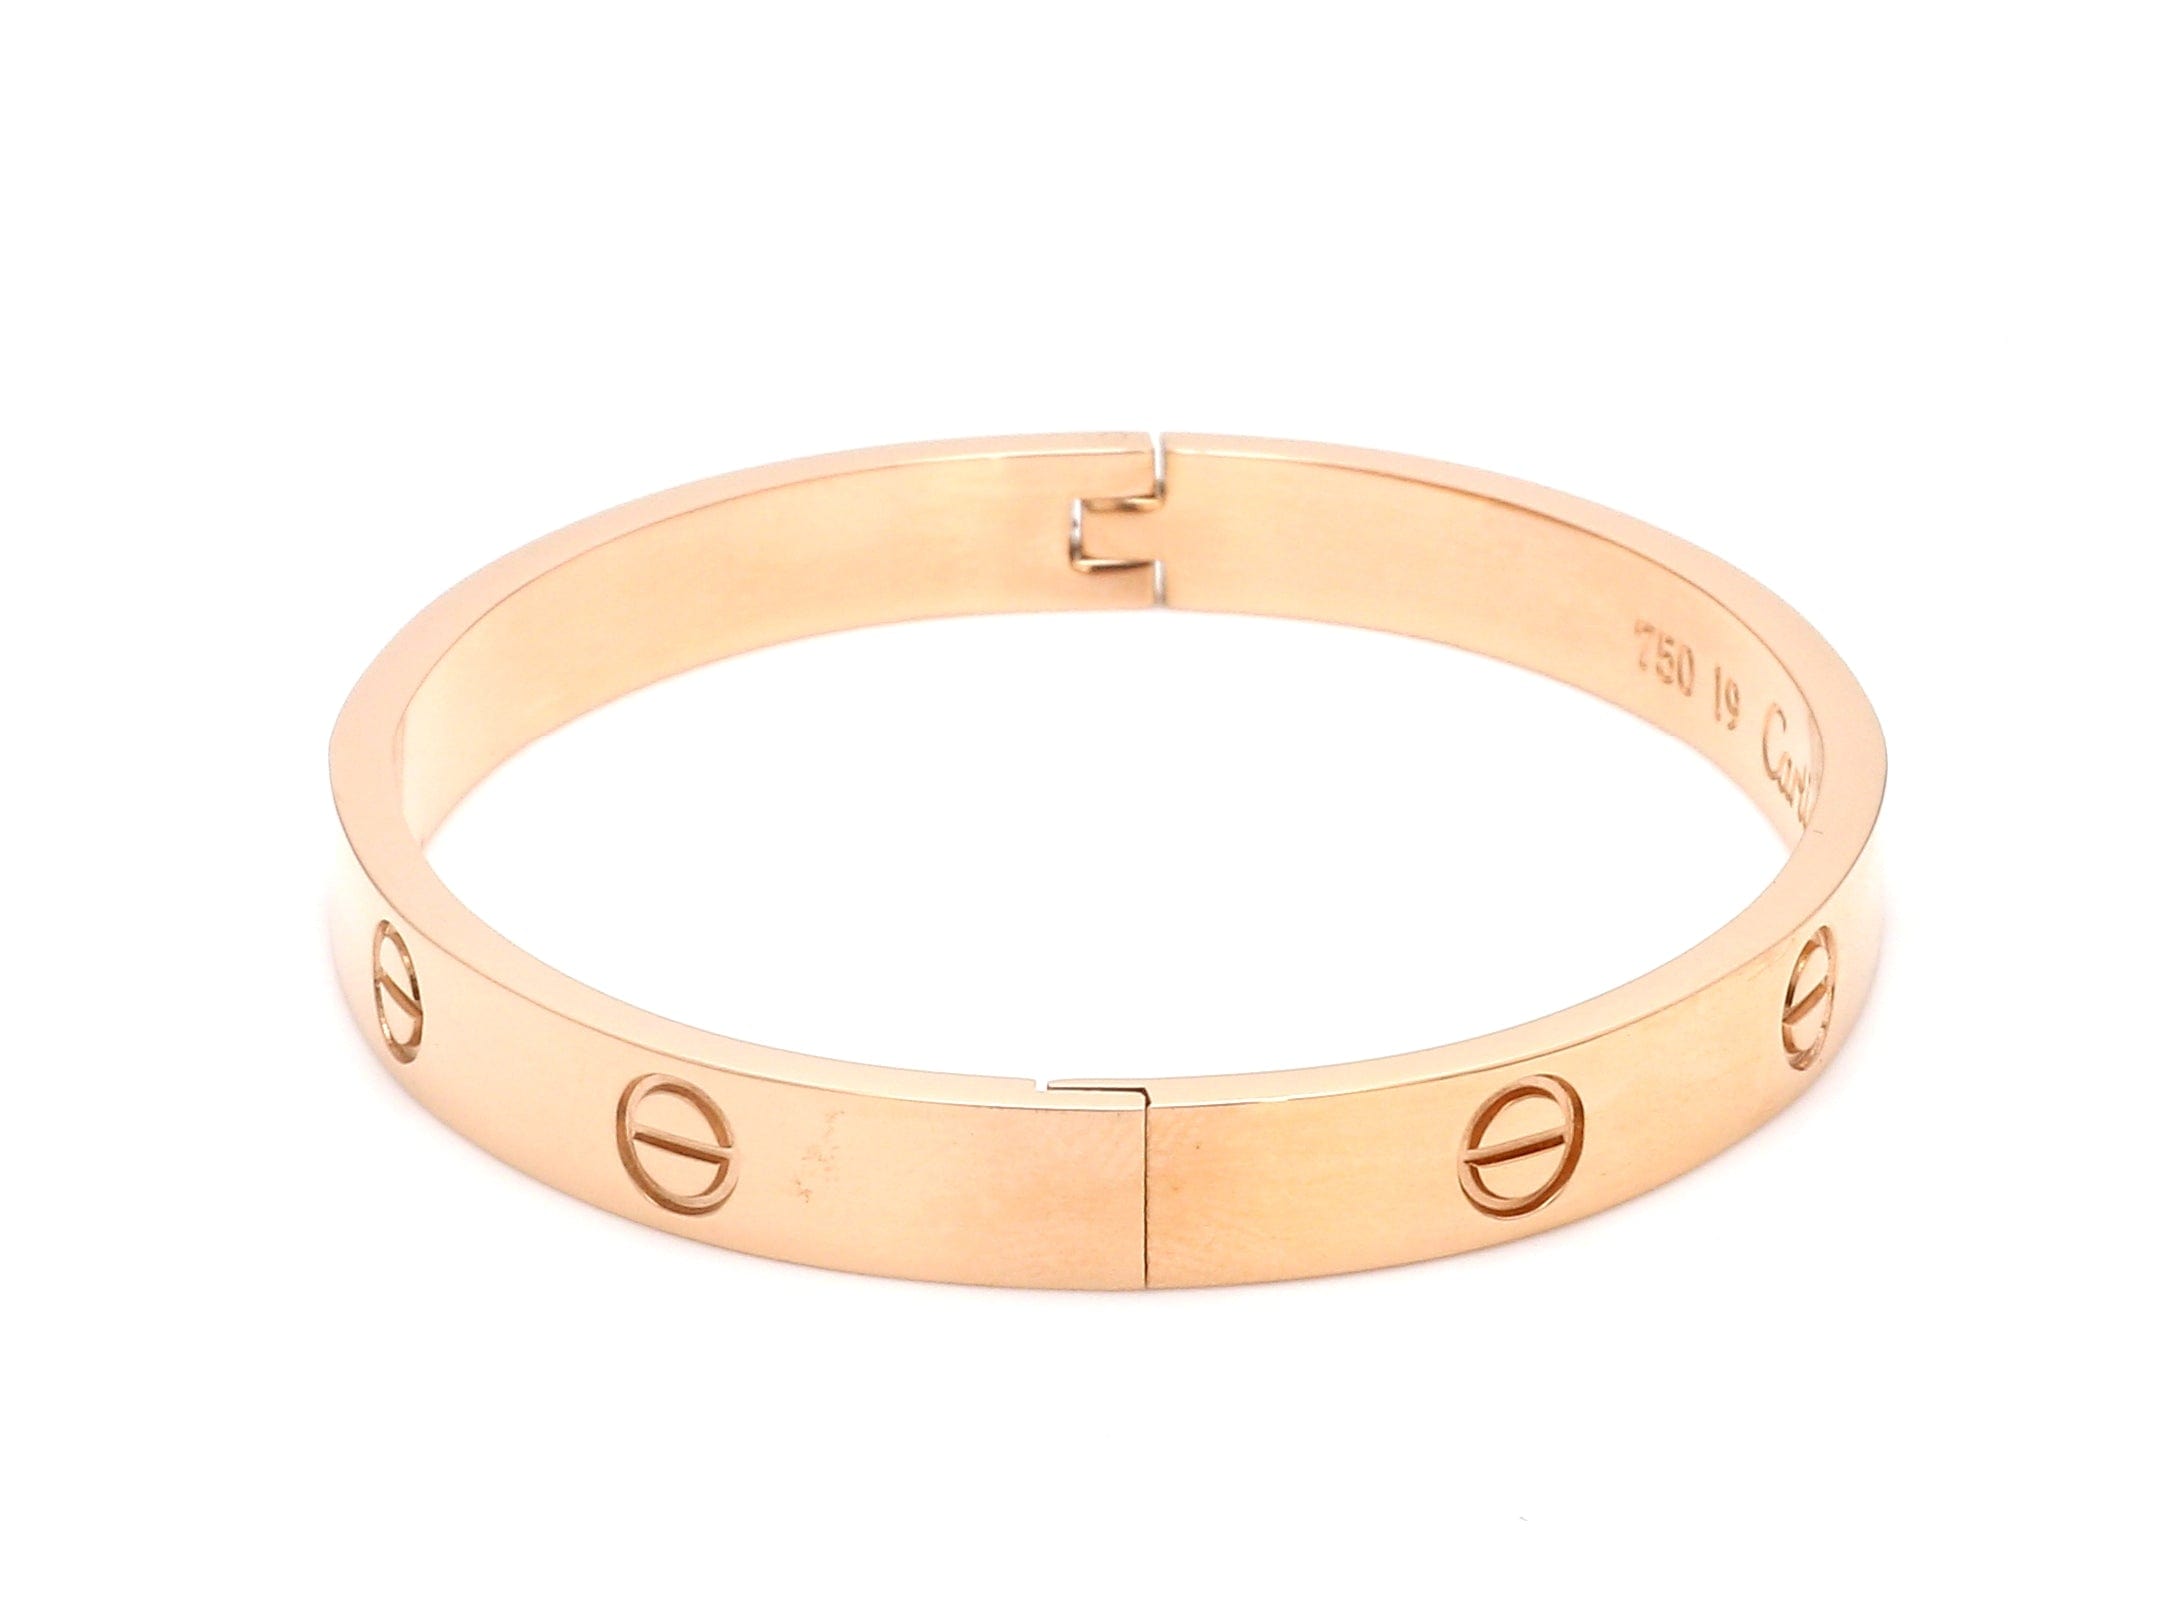 Buy Peora Gold Plated Stylish Openable 316L Stainless Steel Kada Bracelet  for Men and Women at Amazon.in